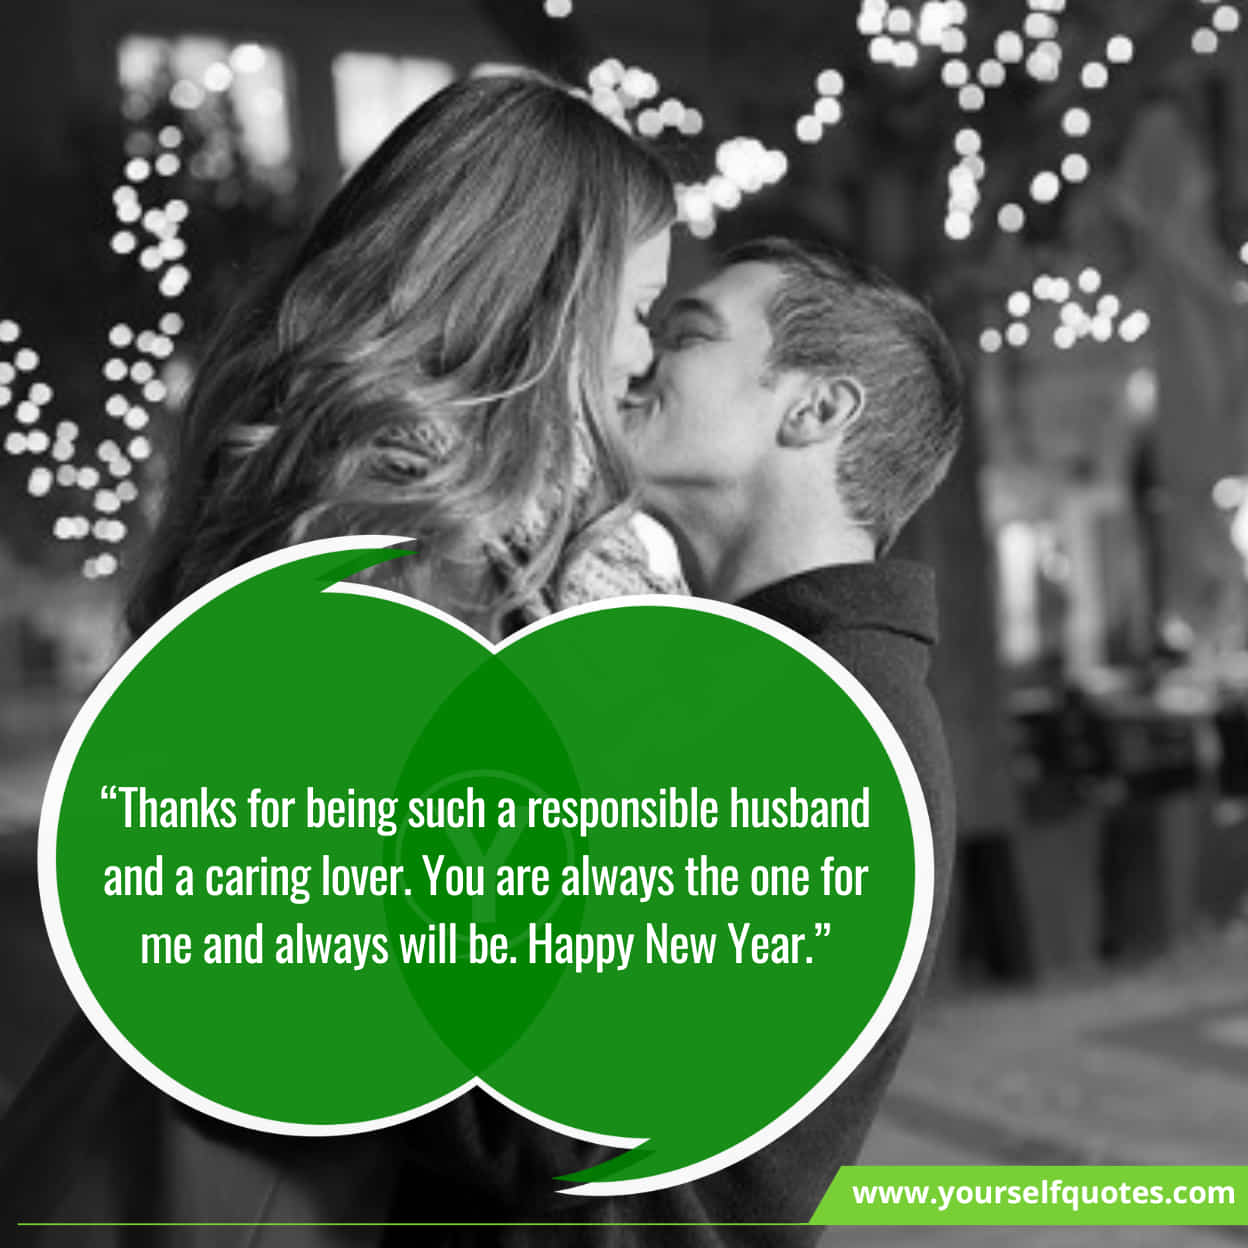 Alluring Adorable New Year Wishes On Husband